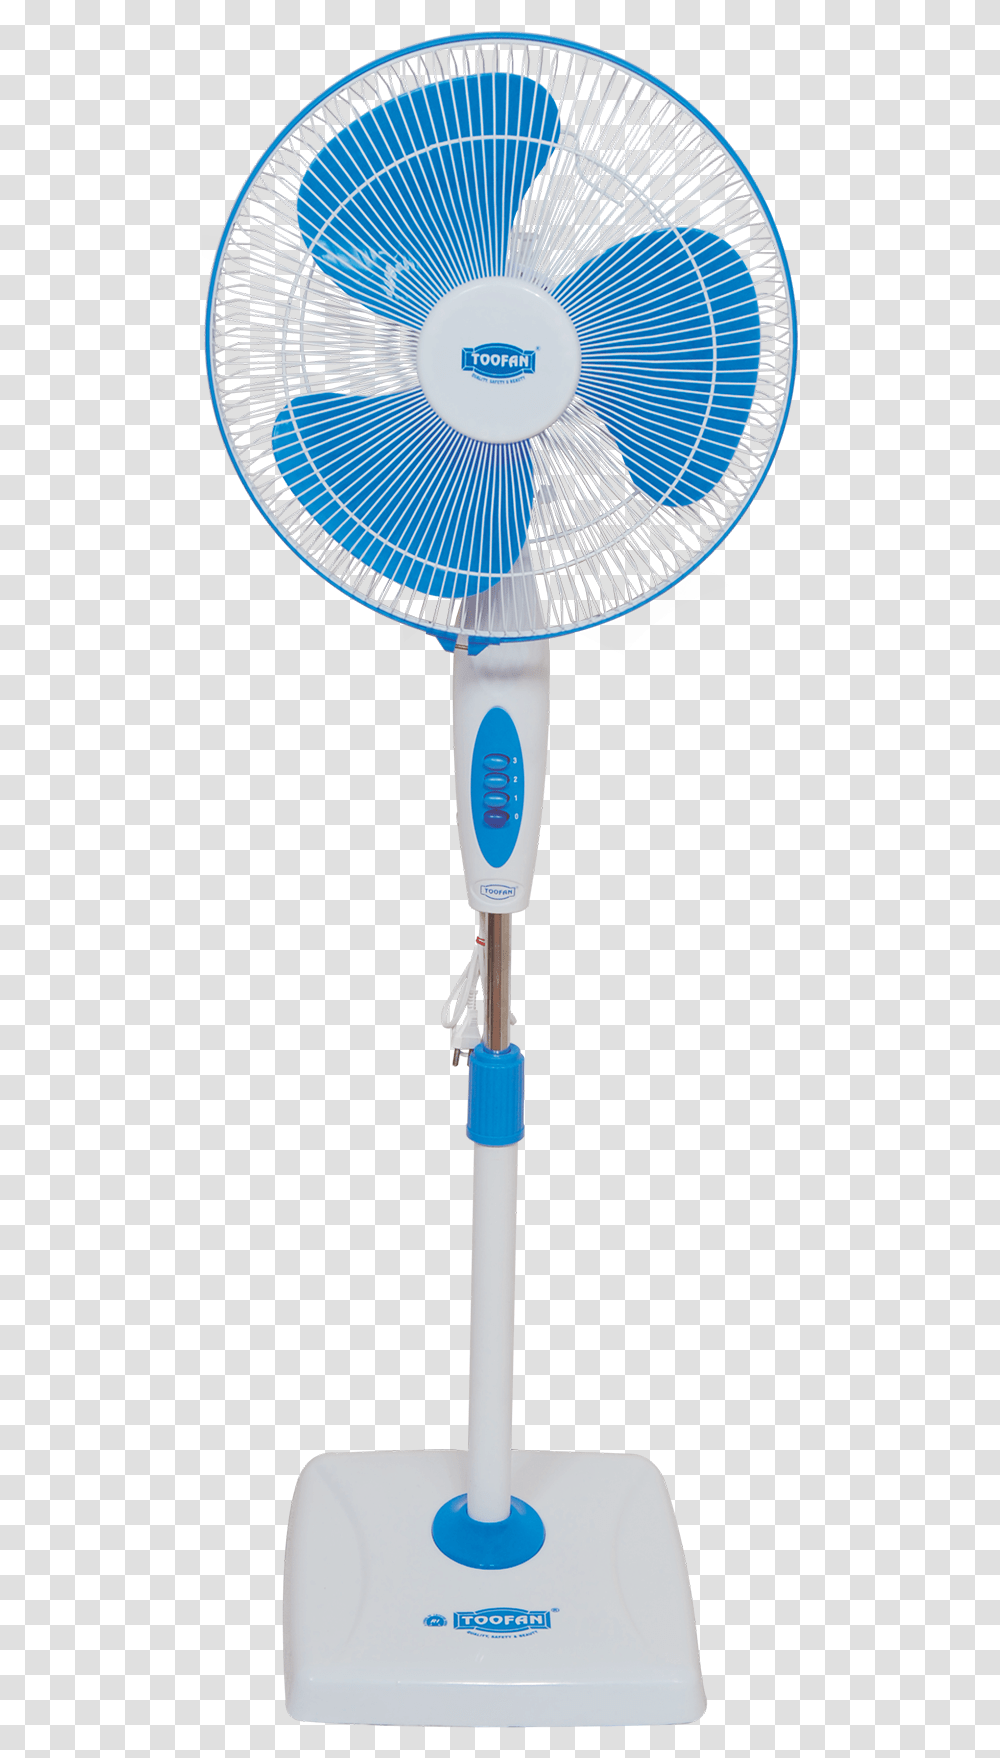 Image Toofan Stand Fan Price, Appliance, Shovel, Tool, Electric Fan Transparent Png